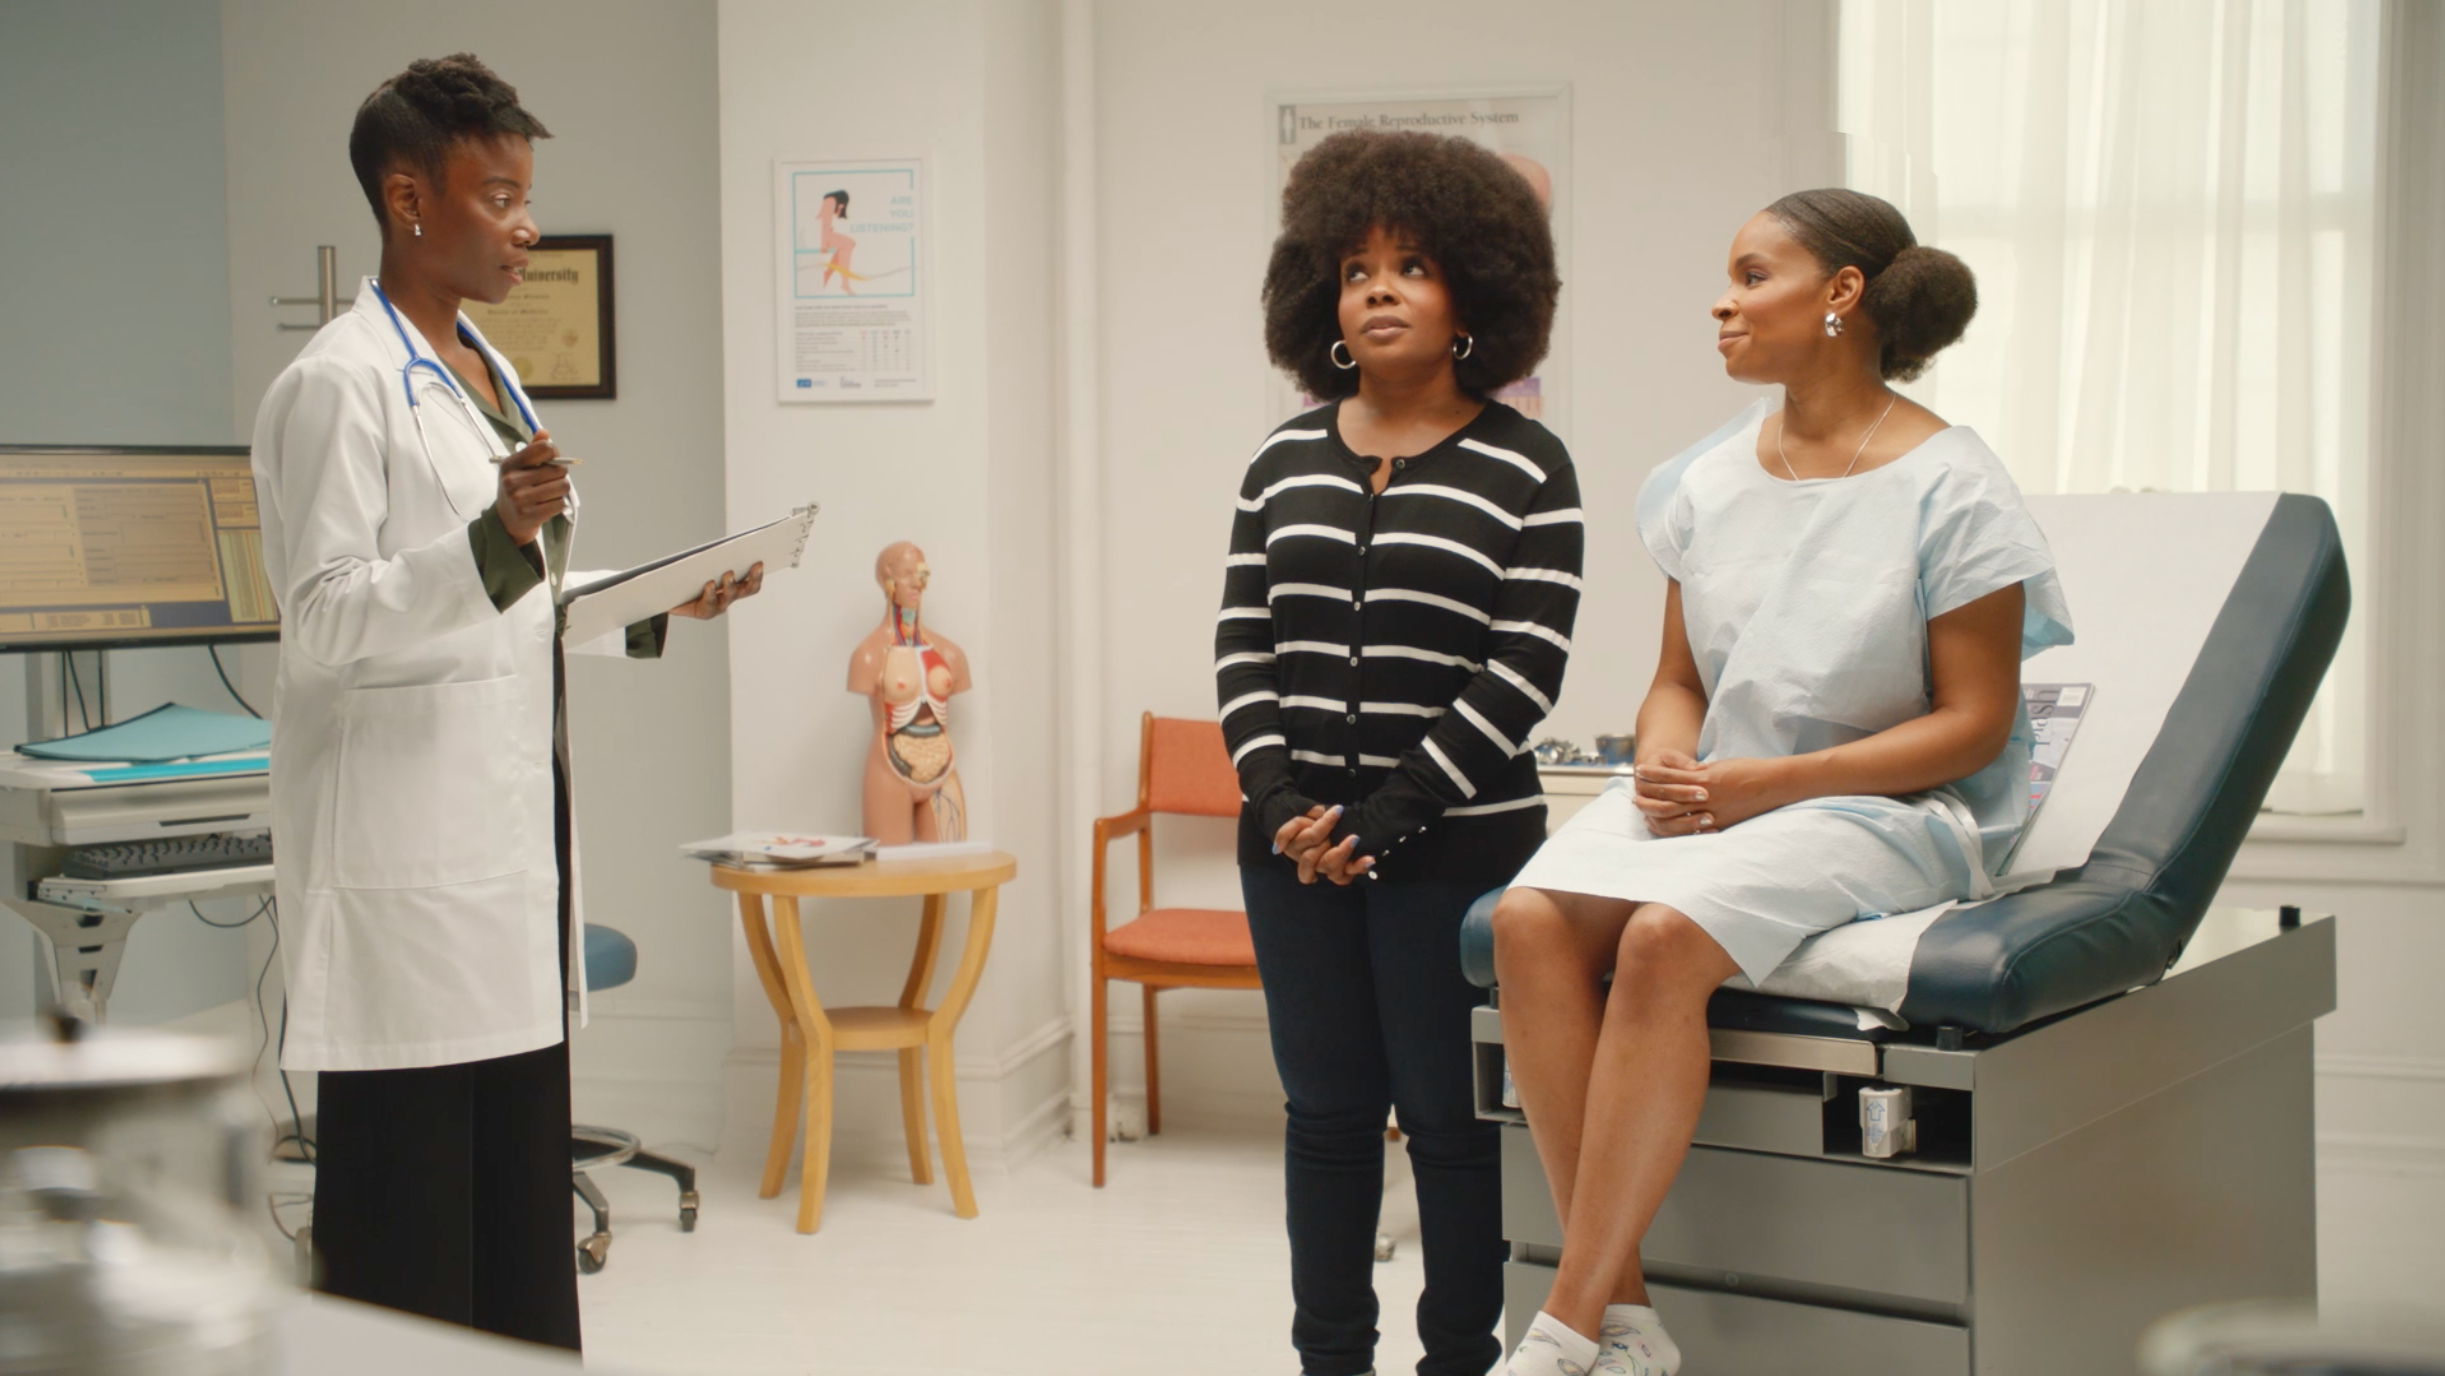 Amber Ruffin and her sister Lacey talk to a doctor in her office